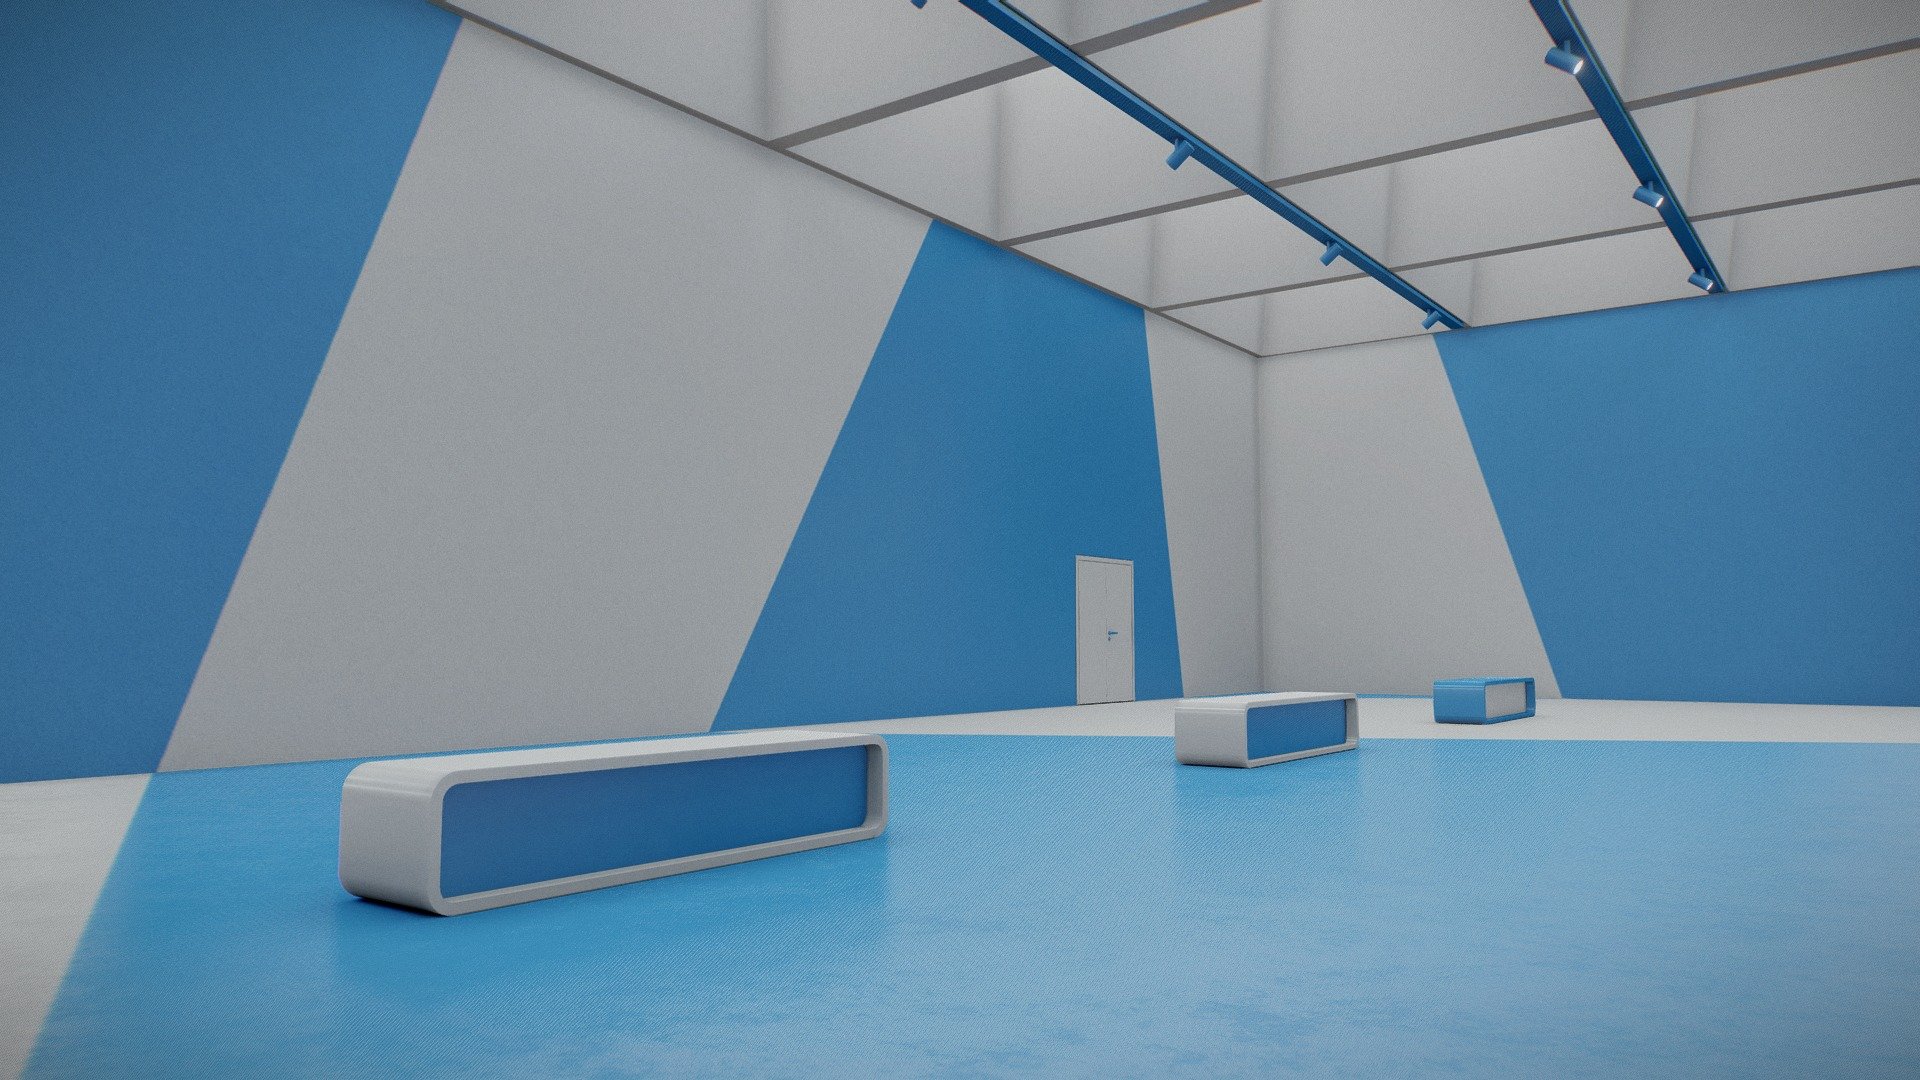 Modern Art Gallery room designed for use in VR or WebGL apps. Scene has got baked in lighting.

The archive contains 4K textures:
Albedo
Roughness
Normal map
Baked Light map
Emission

if you need other color options or a different room configuration, feel free to contact at: mvrc.art@gmail.com - VR Modern Gallery Room - Download Free 3D model by Maxim Mavrichev (@mvrc.art) 3d model